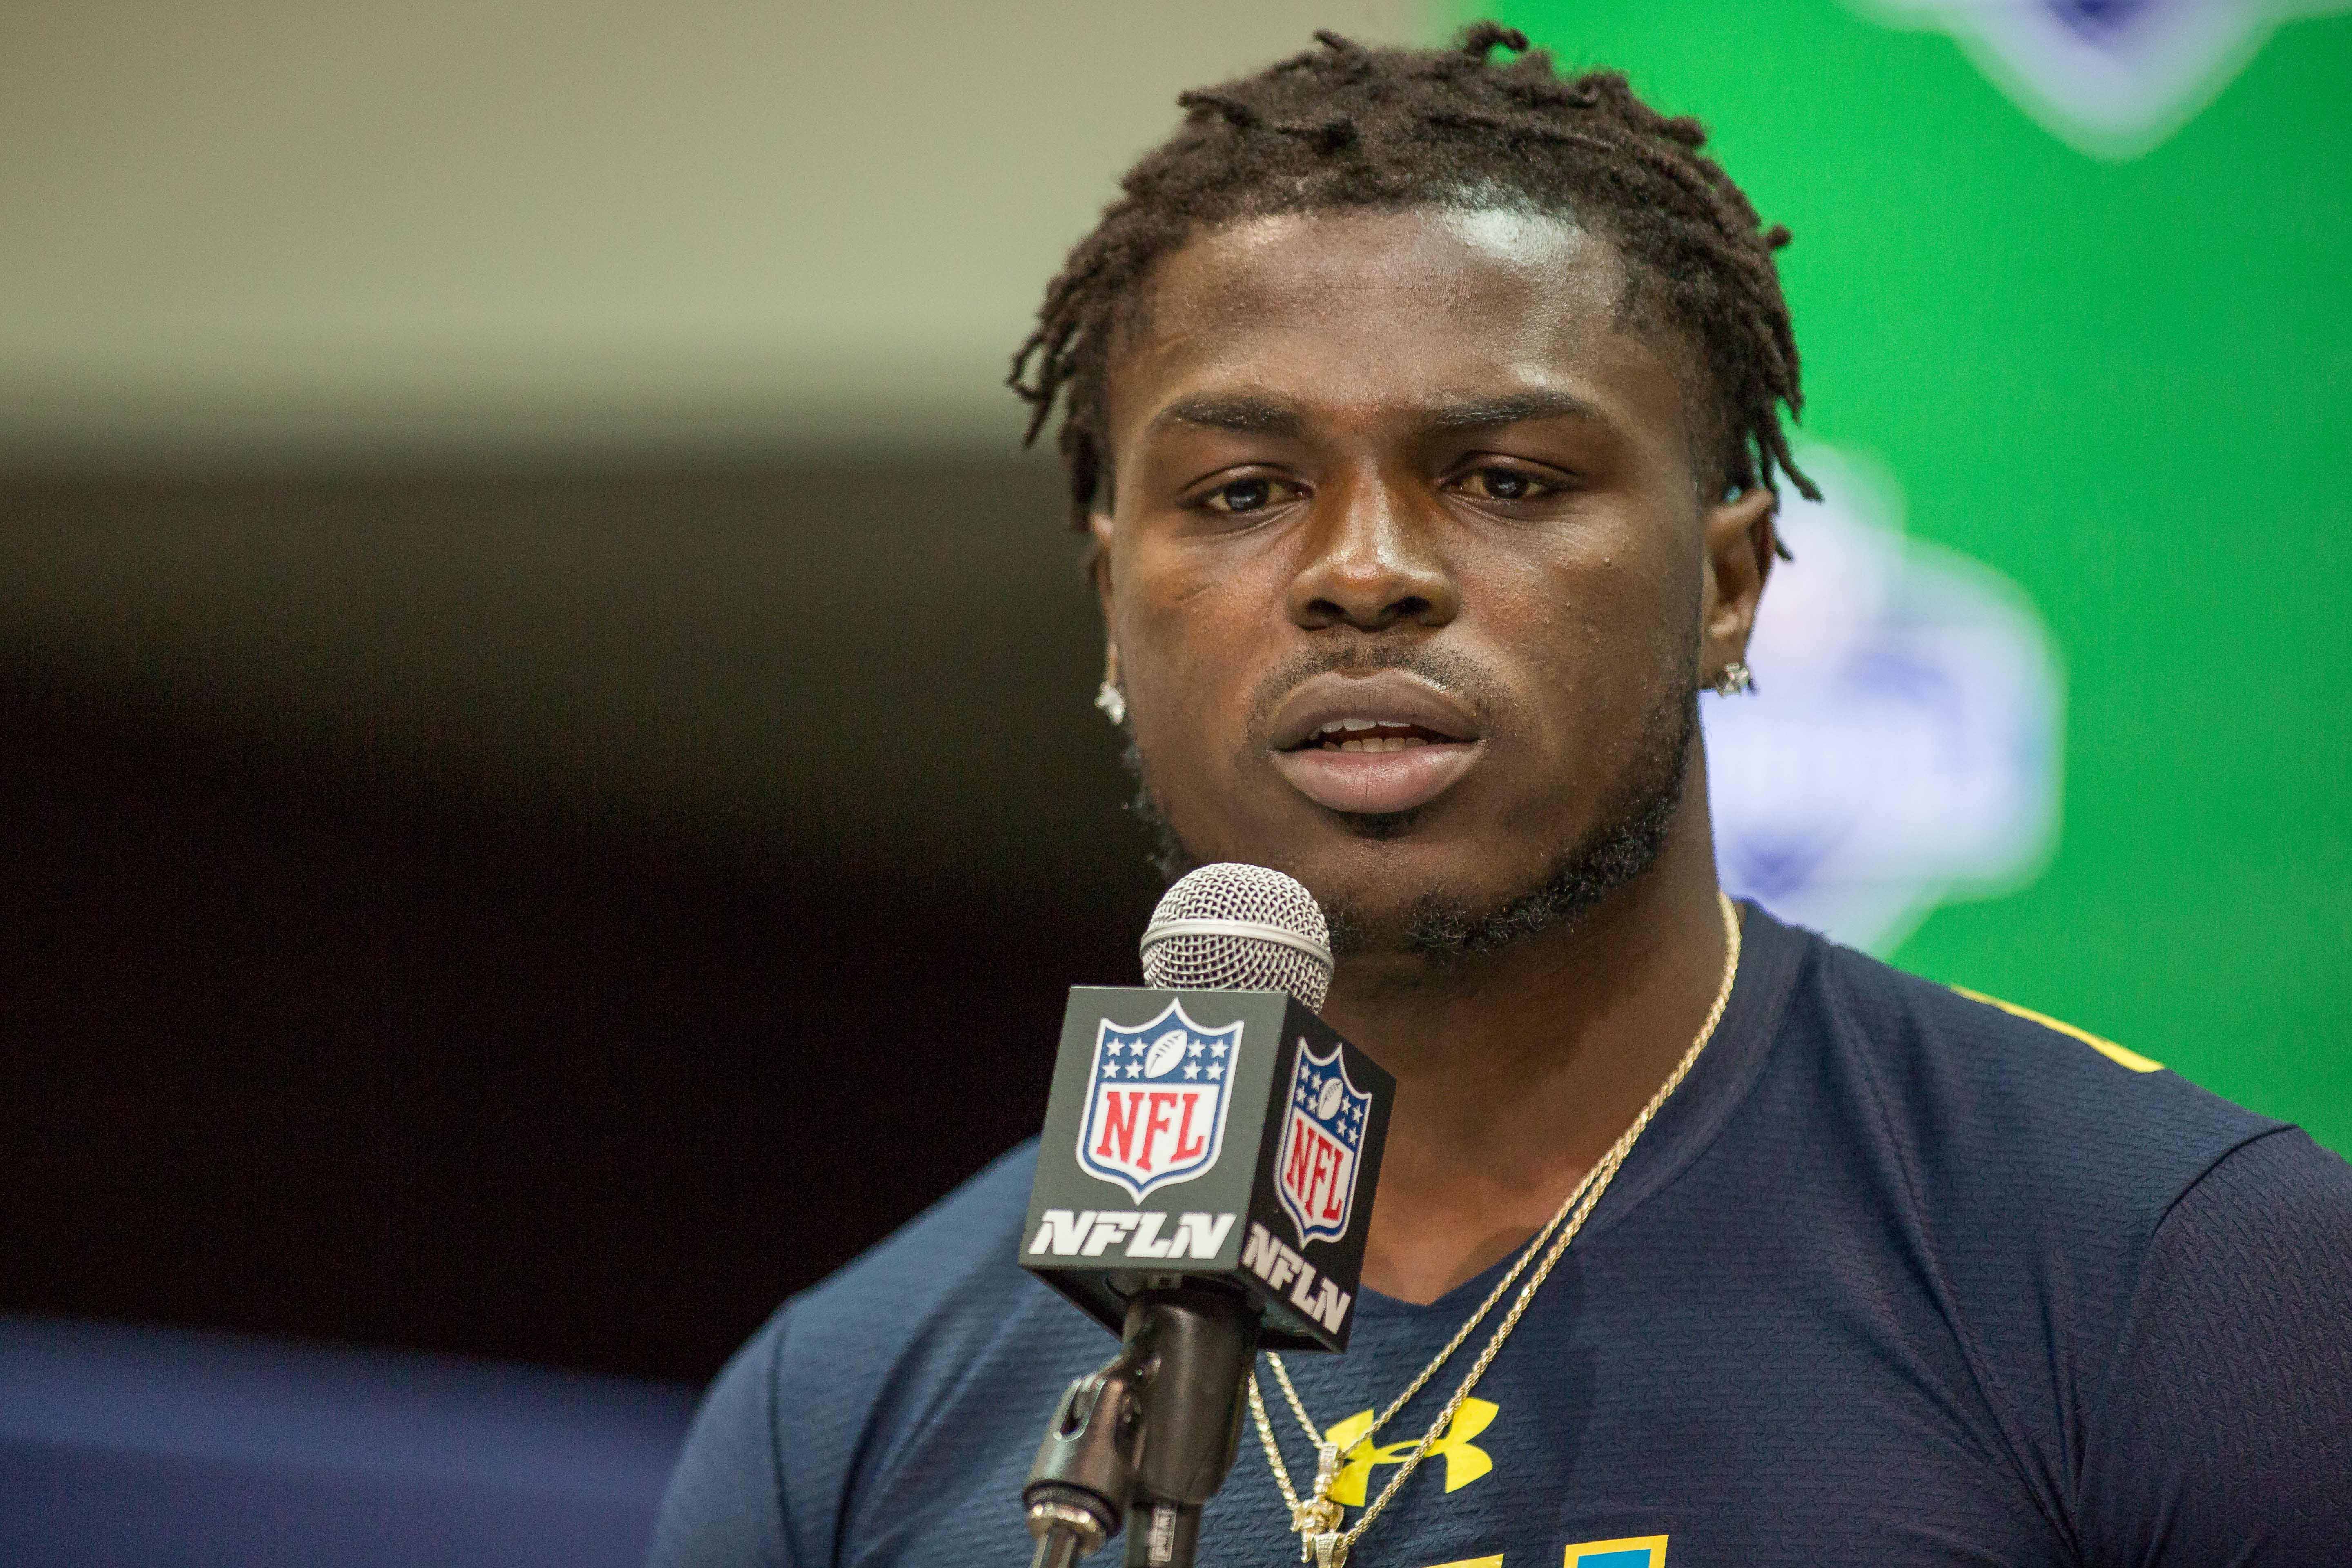 NFL Draft Preview: Jabrill Peppers - ESPN 98.1 FM - 850 AM WRUF